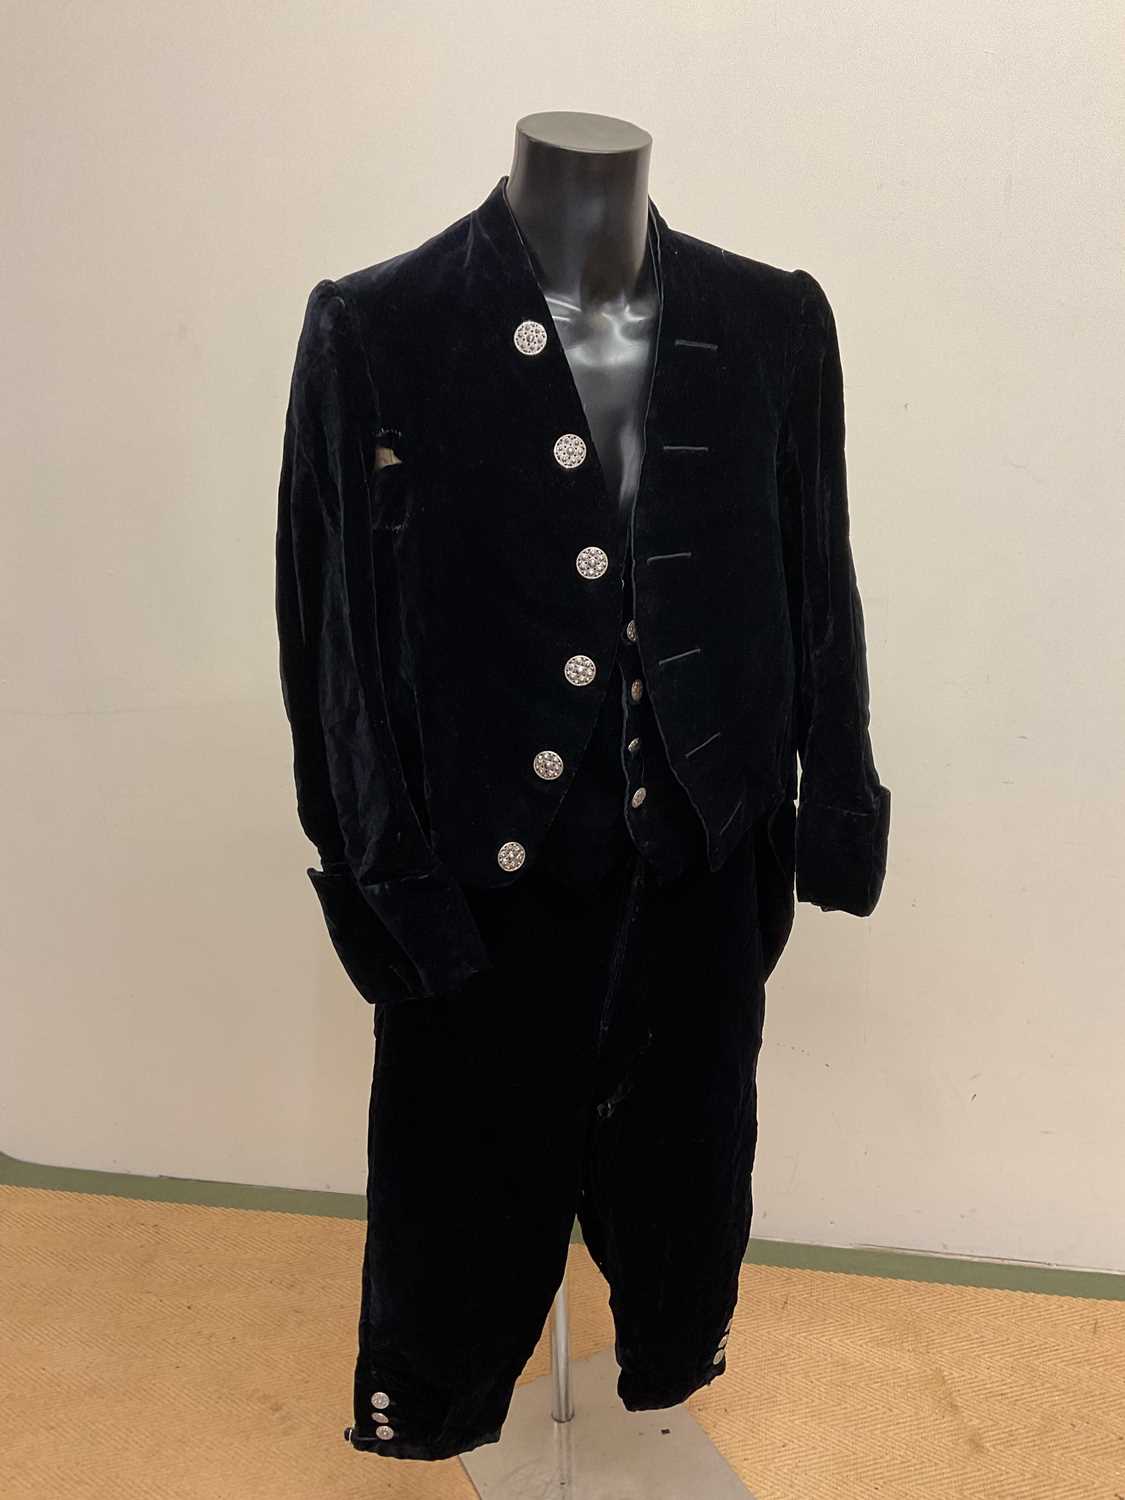 A vintage man's velvet tailcoat with waistcoat and knickerbockers, made by Robt F Gall, 13 Suffolk